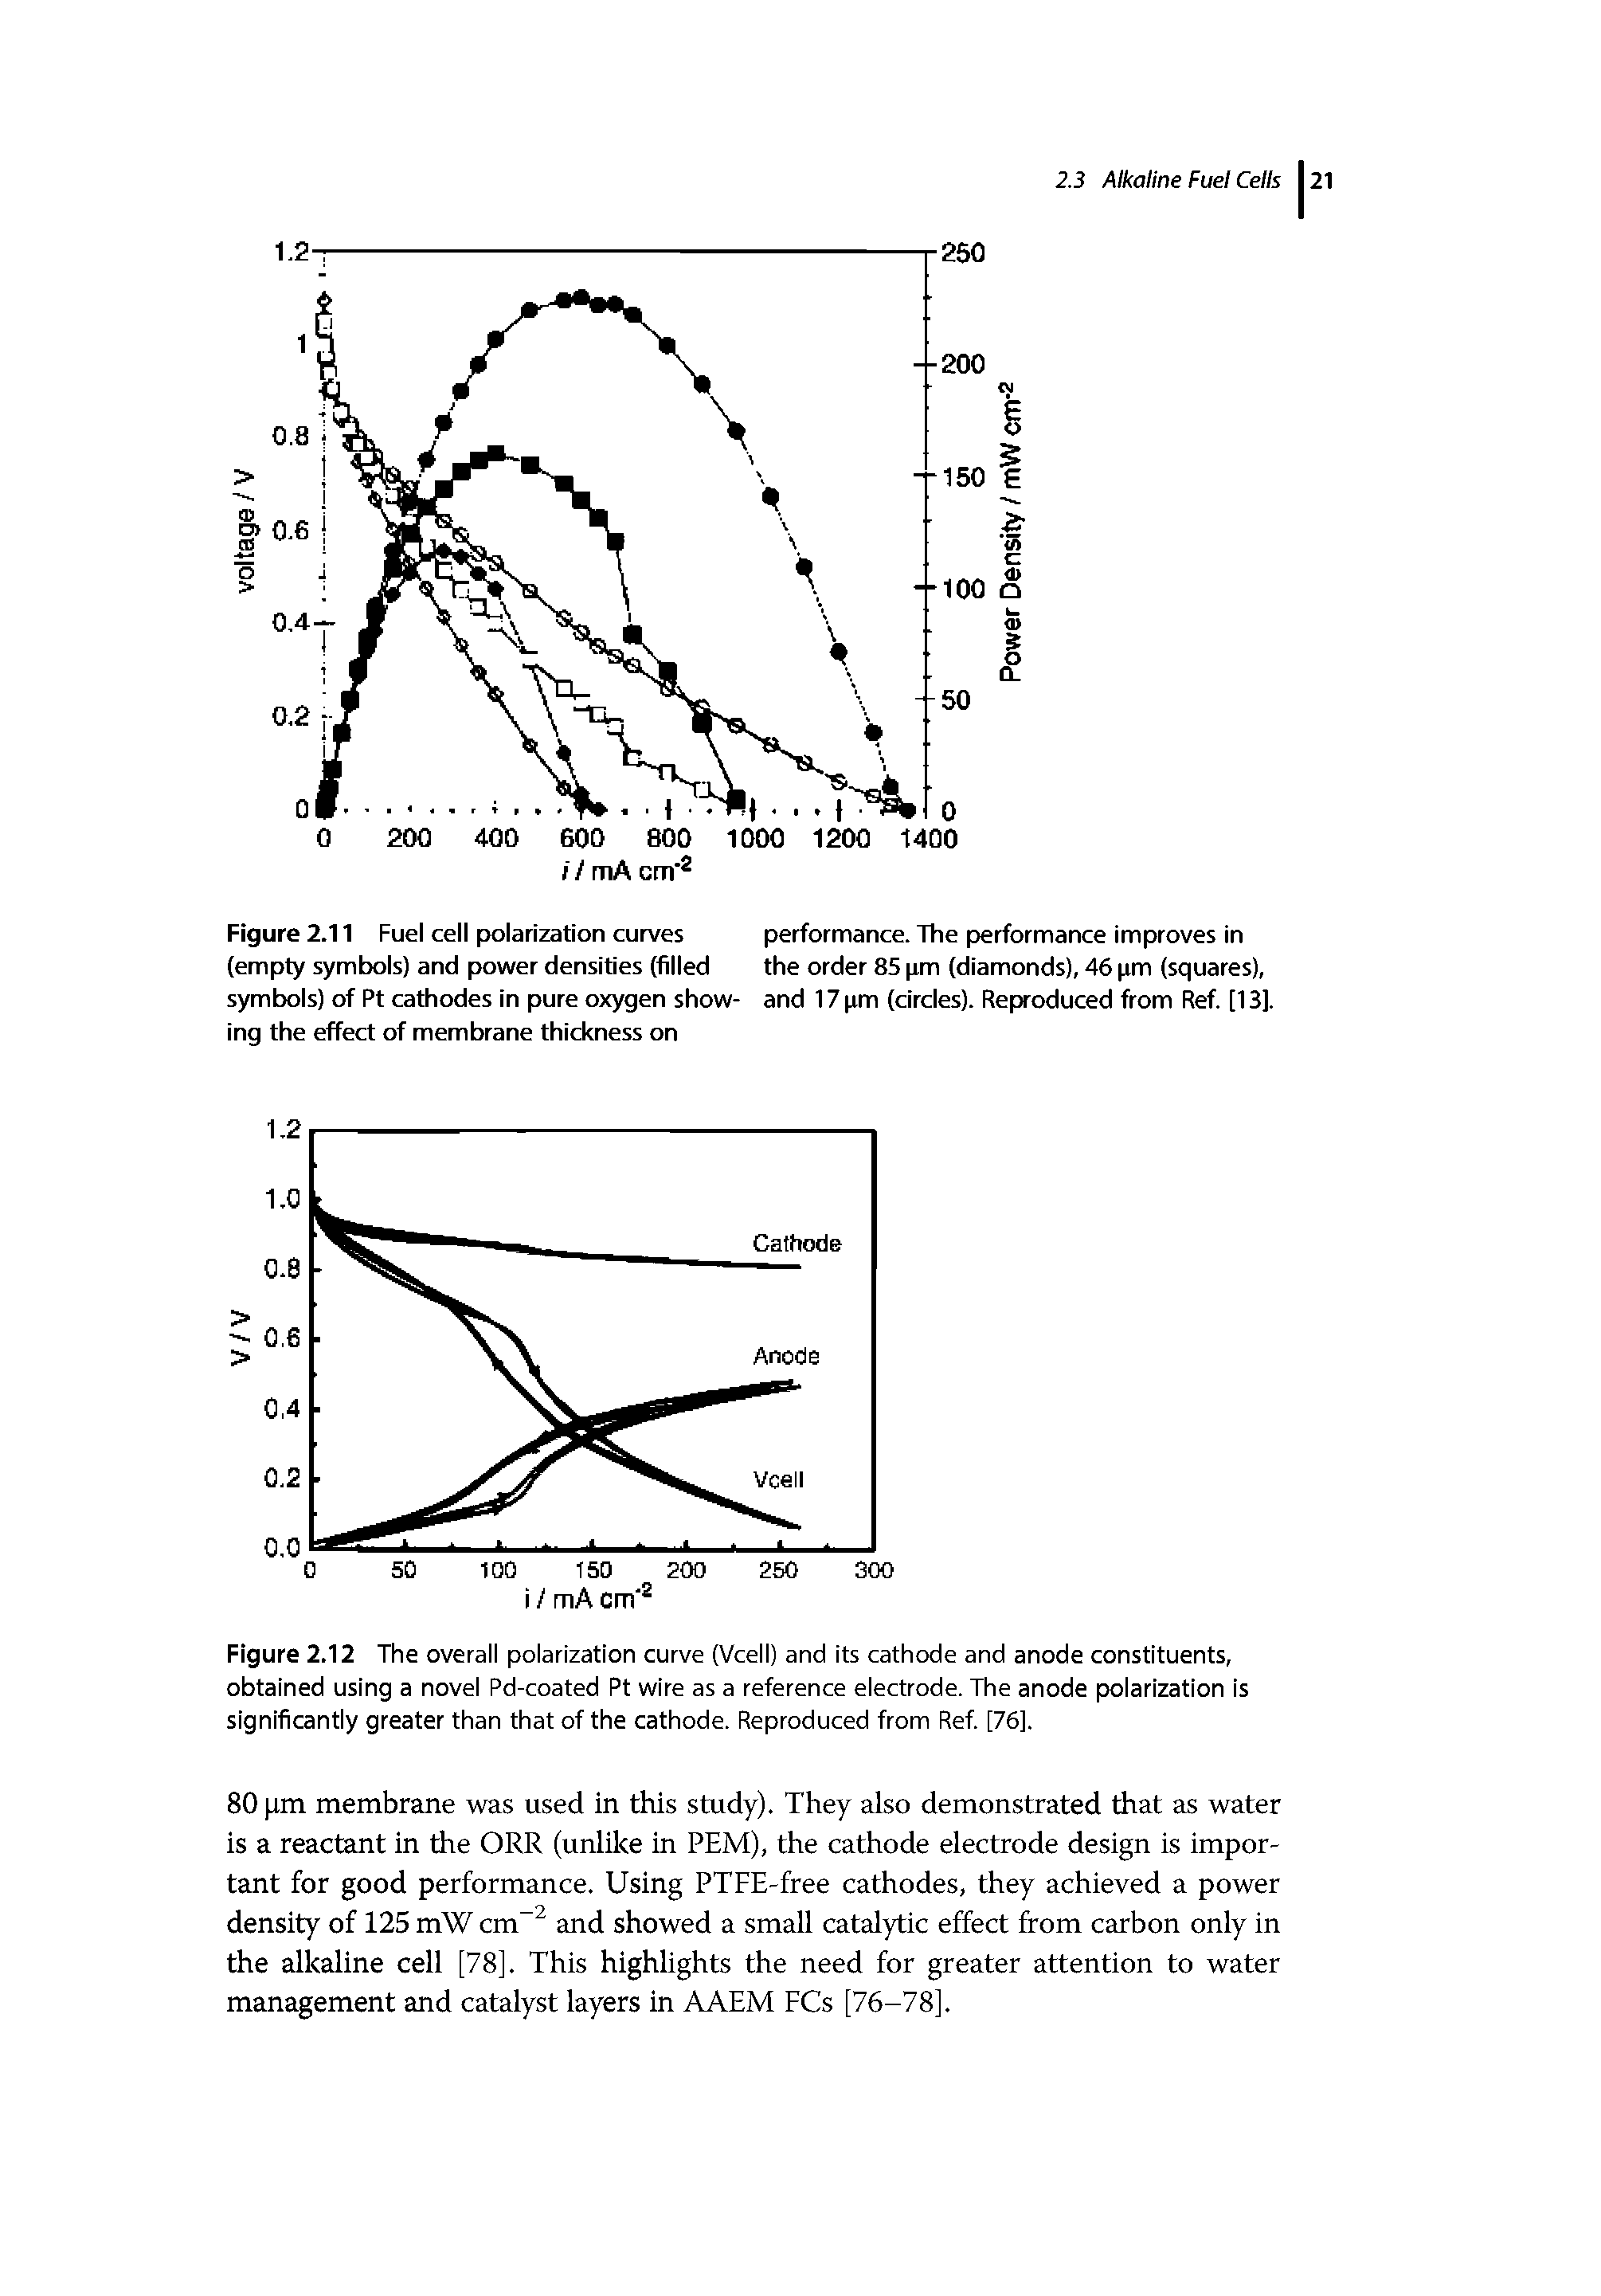 Figure 2.11 Fuel cell polarization curves (empty symbols) and power densities (filled symbols) of Pt cathodes in pure oxygen showing the effect of membrane thickness on...